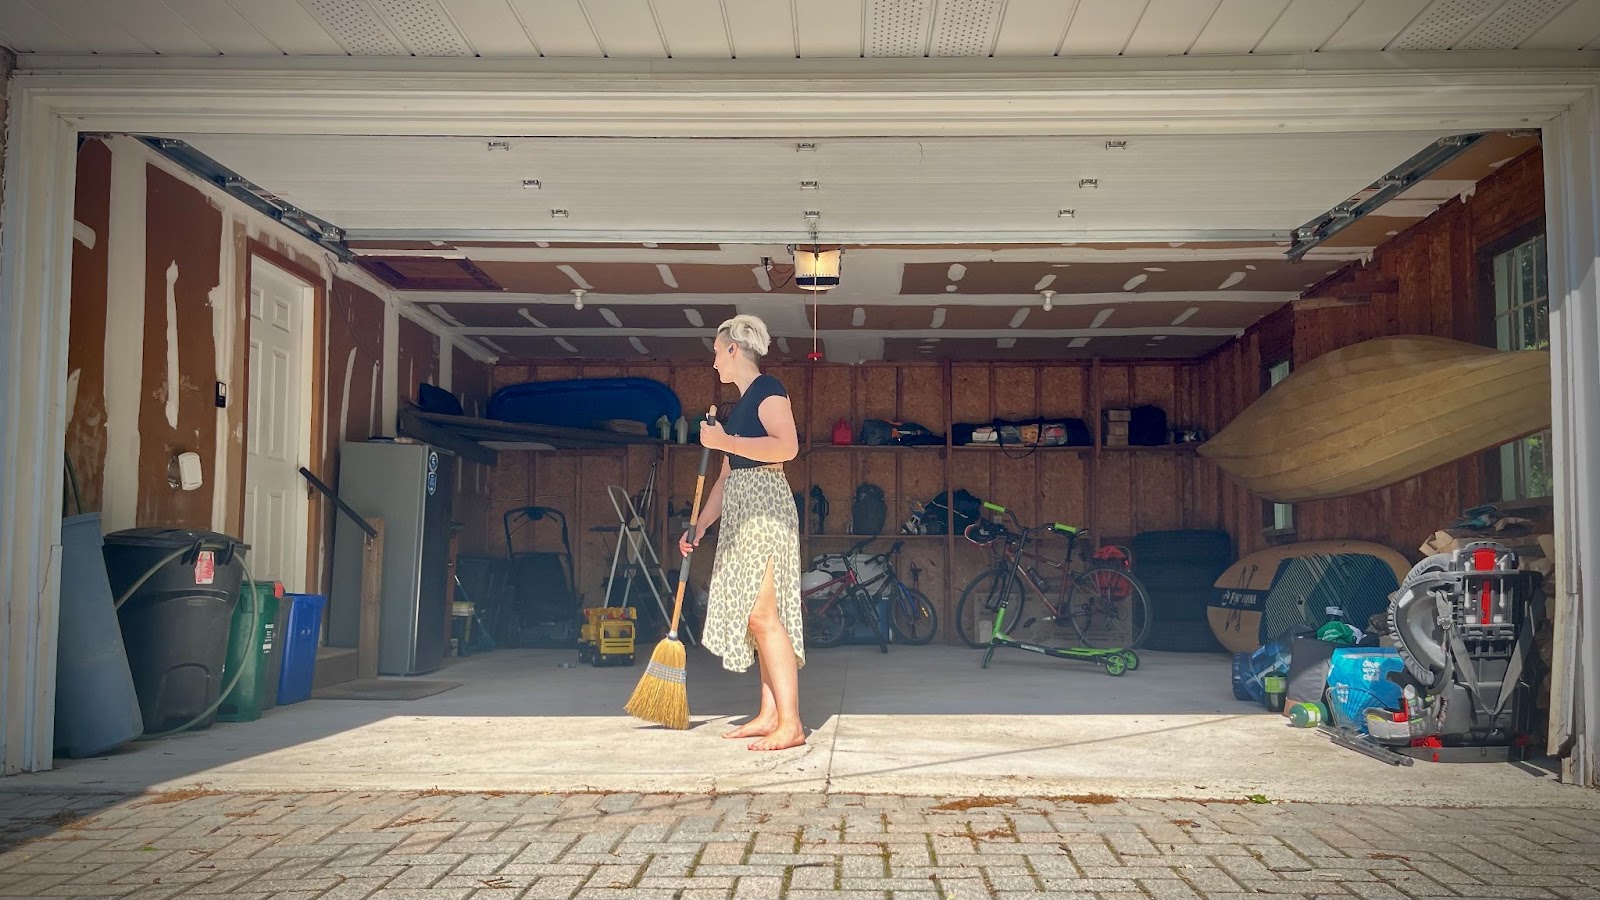 Tarzan takes a straw broom to the very clean floor of her tidy two-car garage. A canoe hangs on the side wall with a paddleboard below. There are several bikes and scooters all around her, a step ladder and a neat pile of items she has yet to bring to the dump and honestly probably won't for at least 3-6 months. She is wearing her signature summer outfit: a flowing zebra print skirt and simple black crop top.